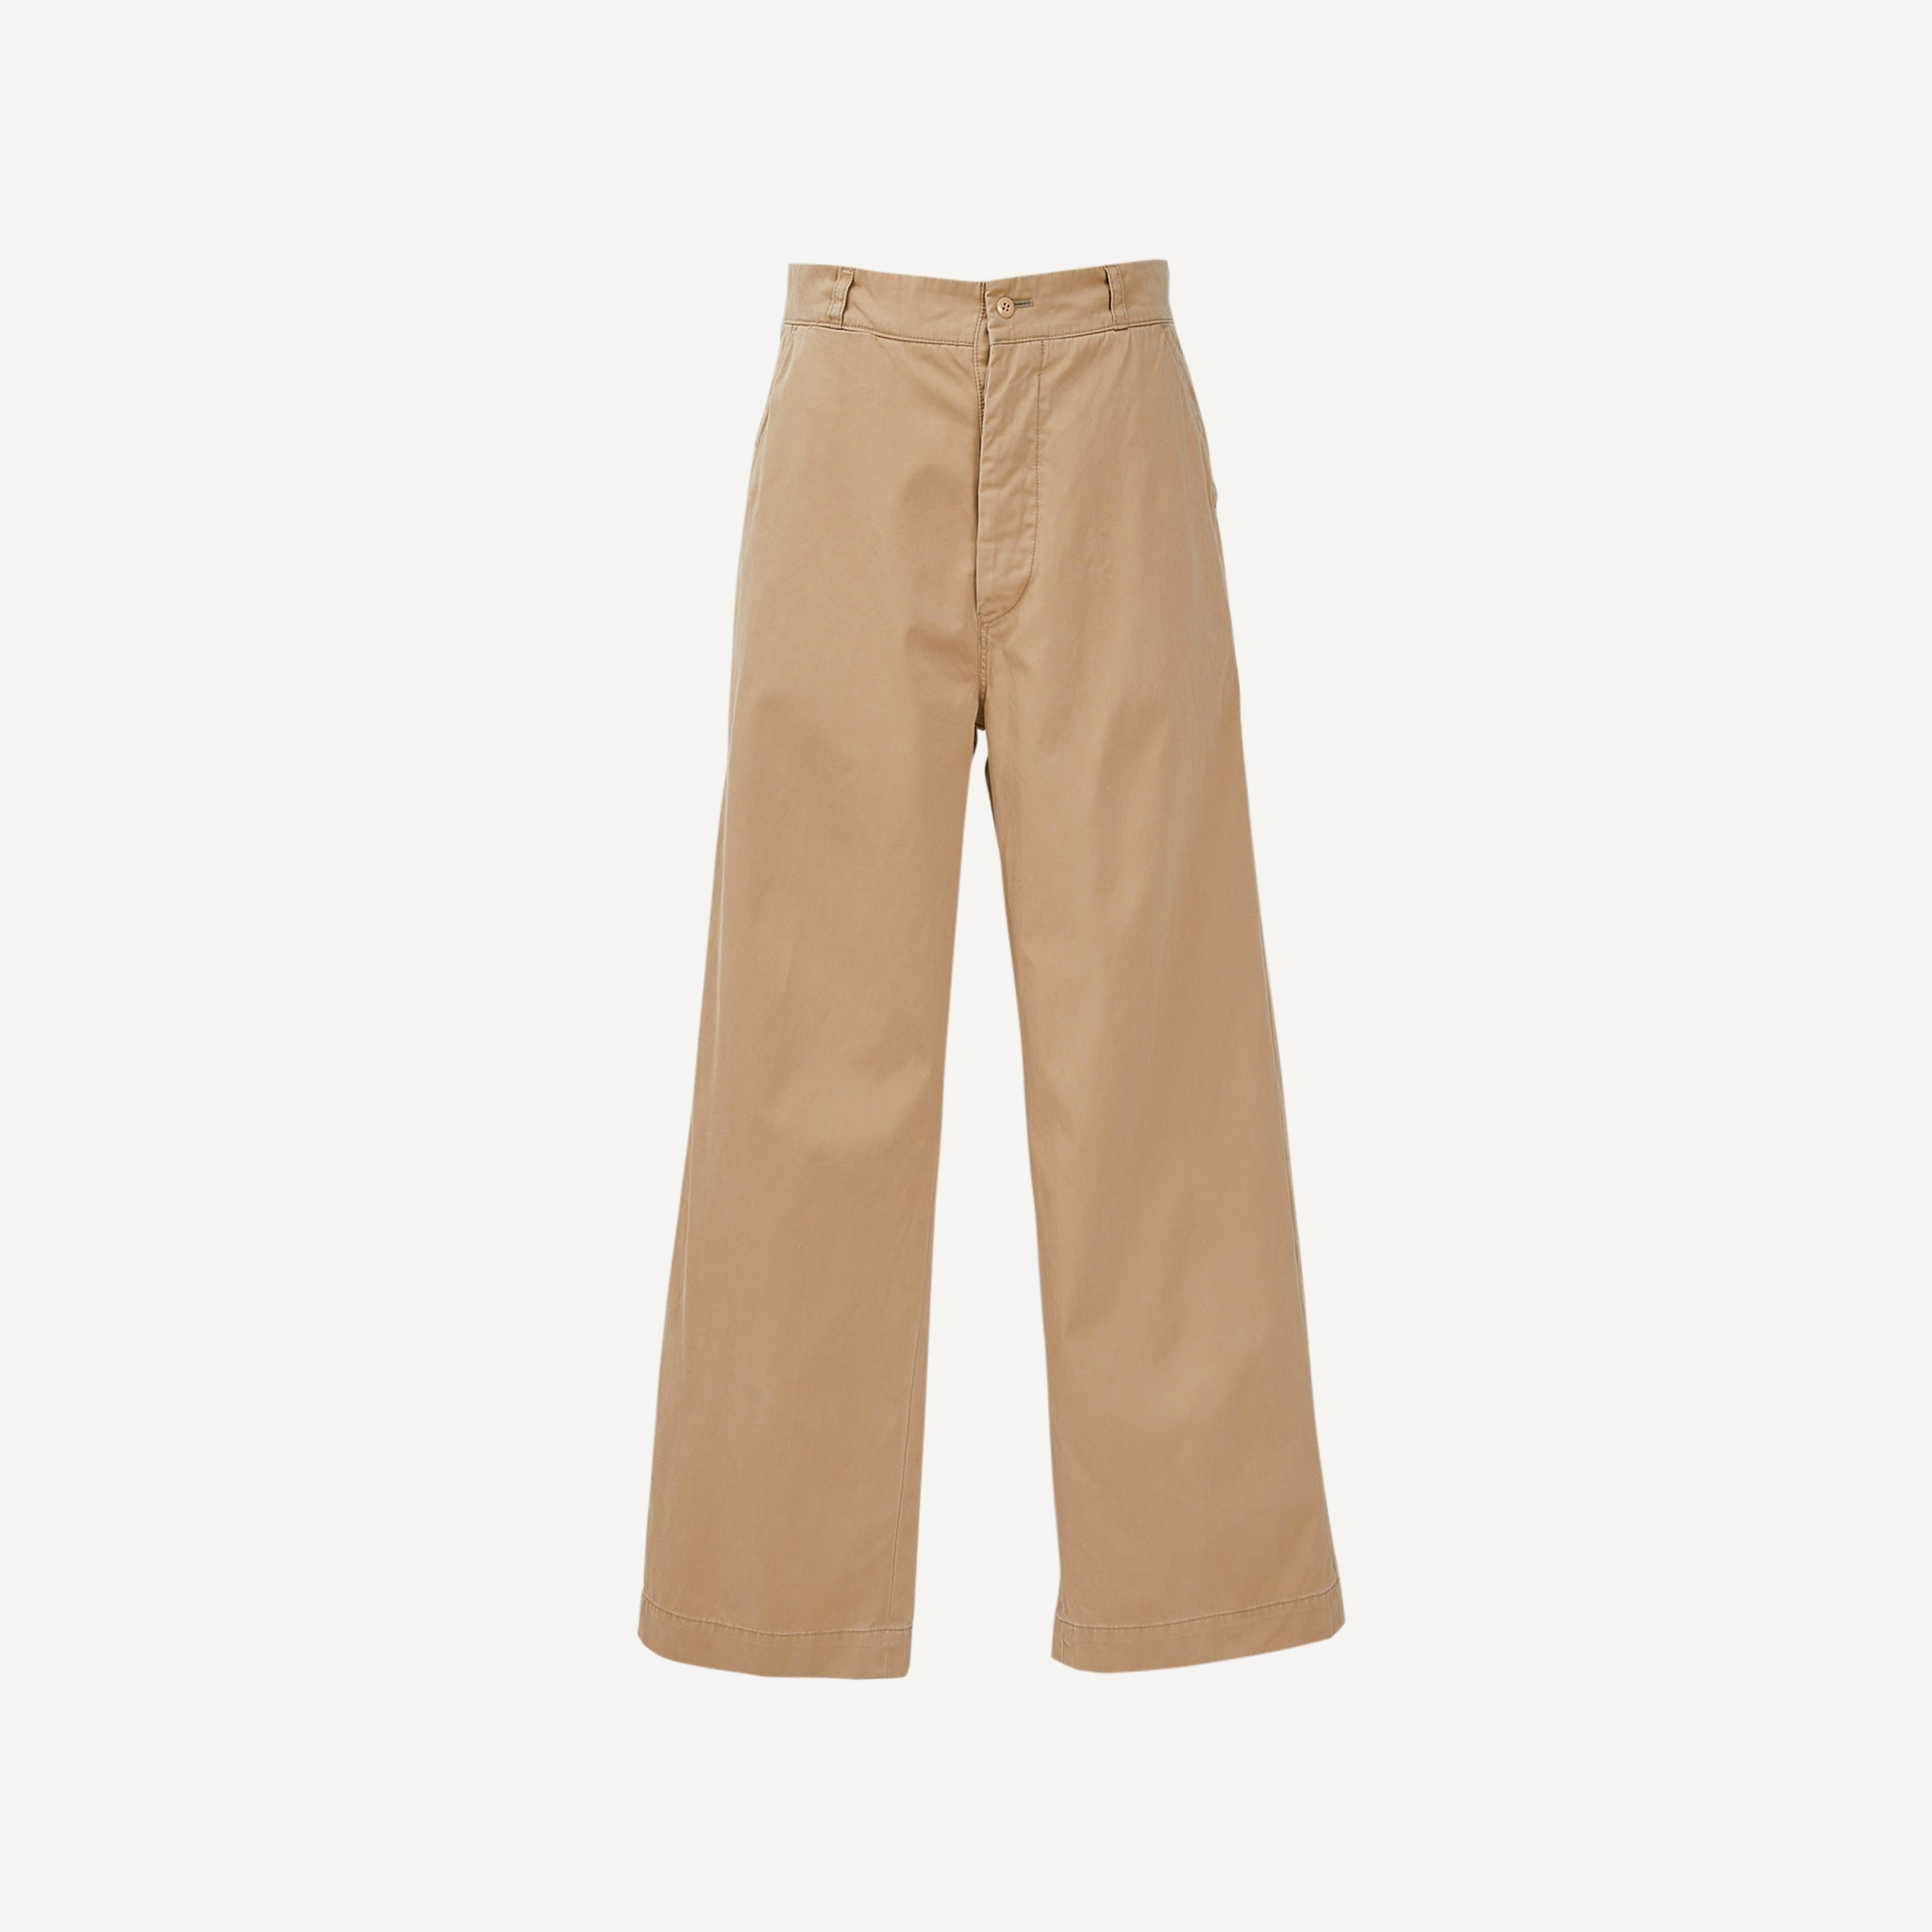 CHIMALA OFFICER'S TROUSERS